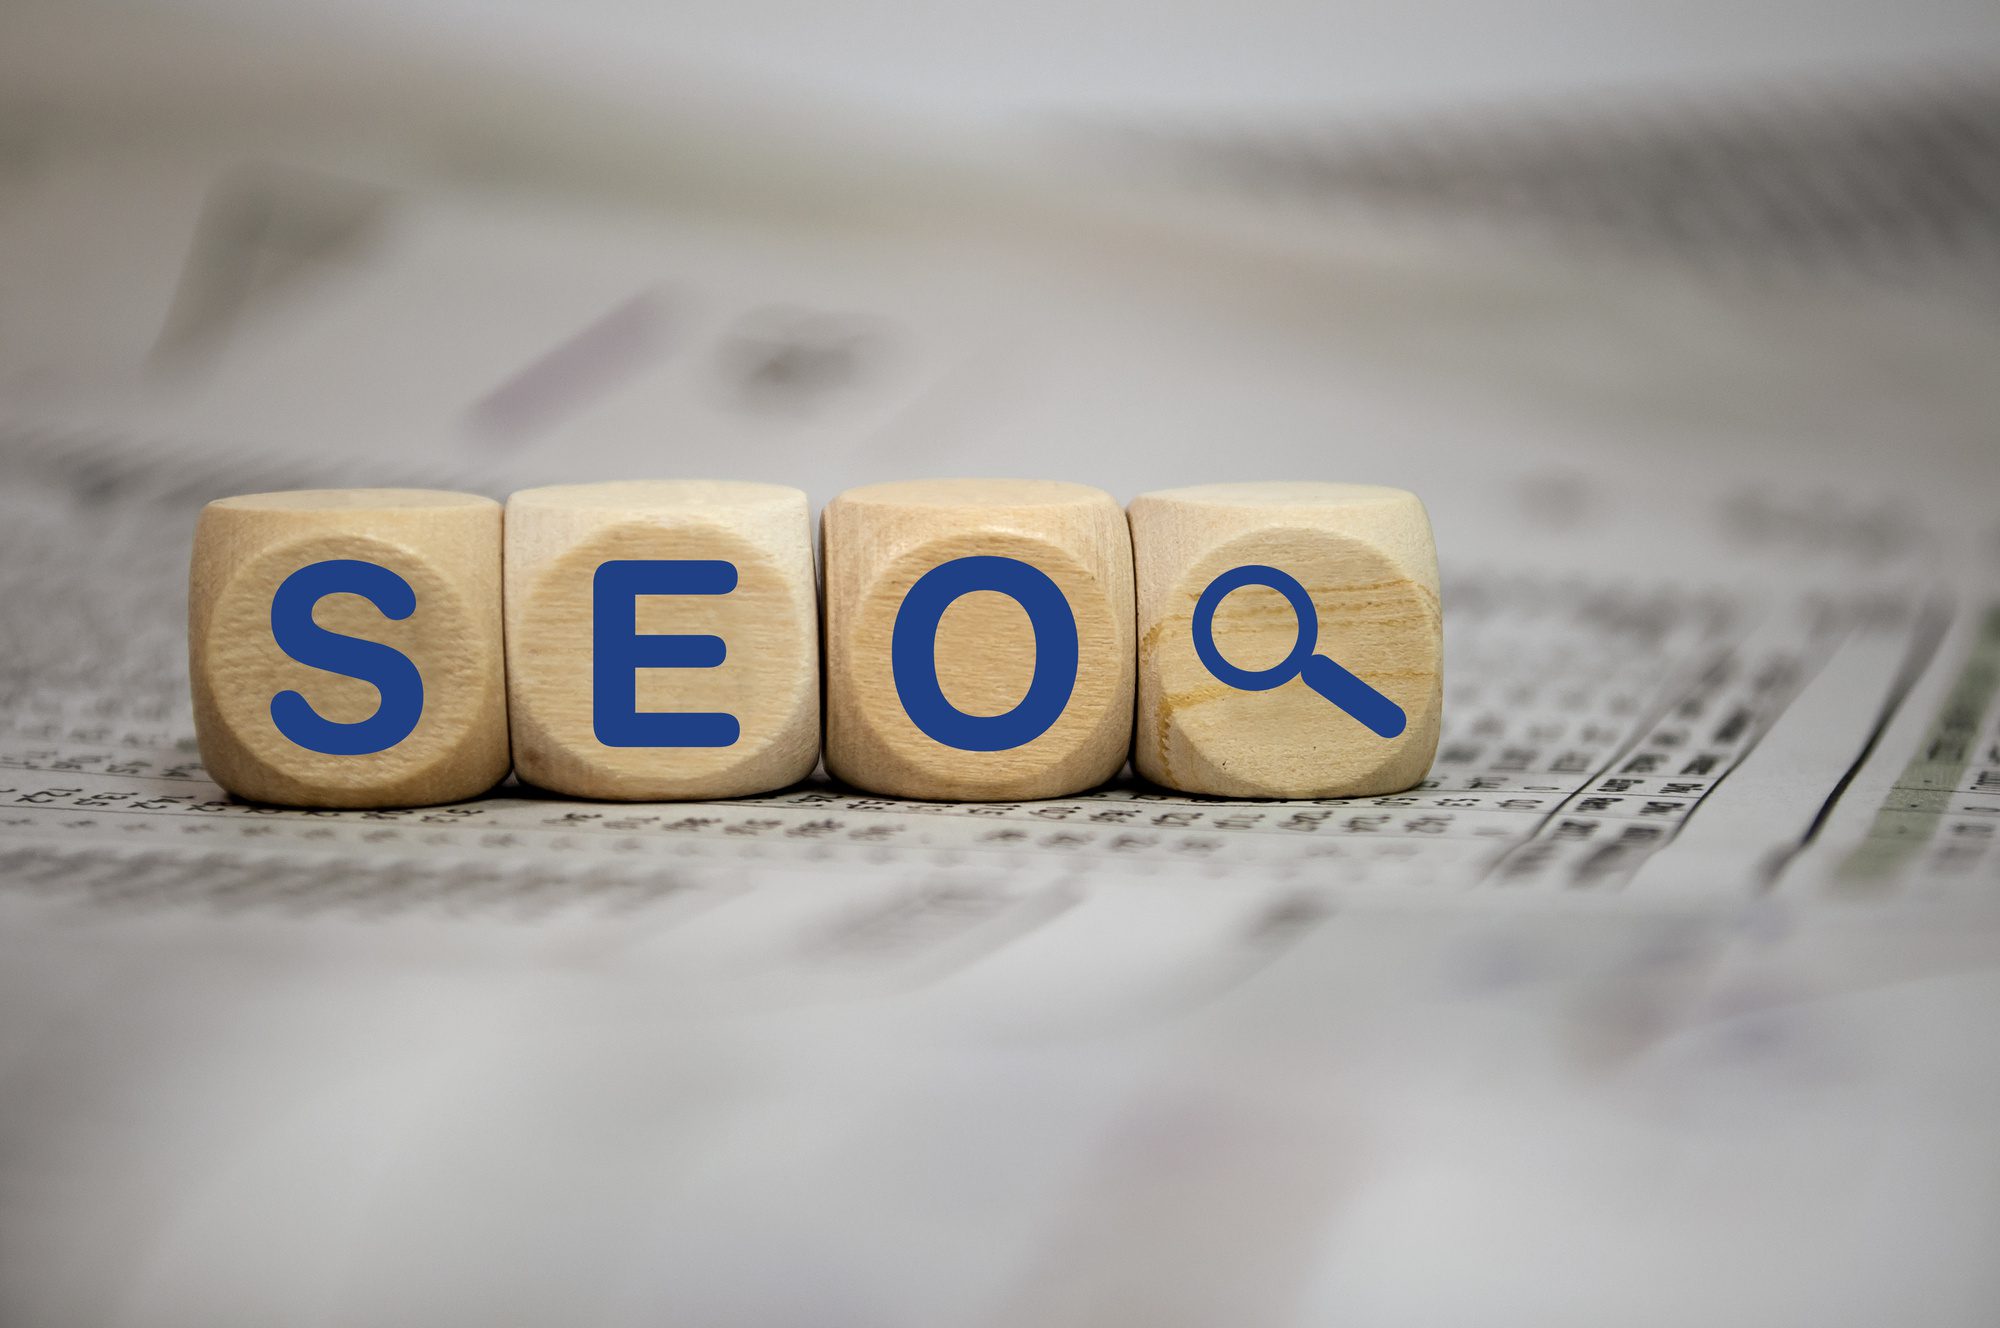 StrategyDriven Online Marketing and Website Development Article | 5 Best SEO Practices for Small Businesses